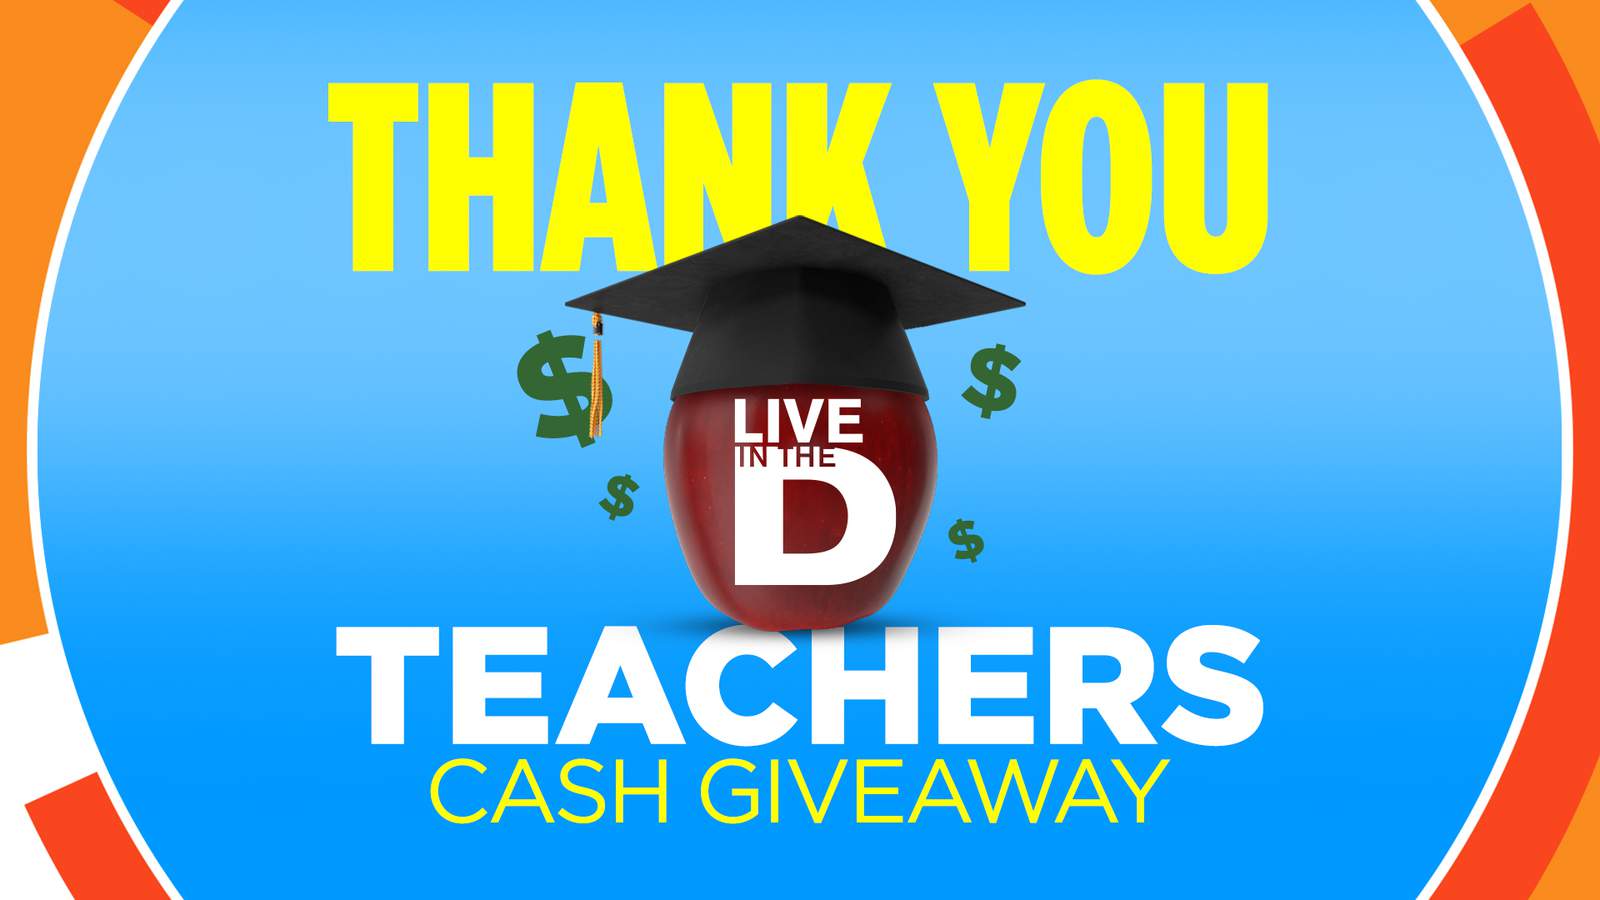 Thank You Teachers Cash Giveaway Contest Rules